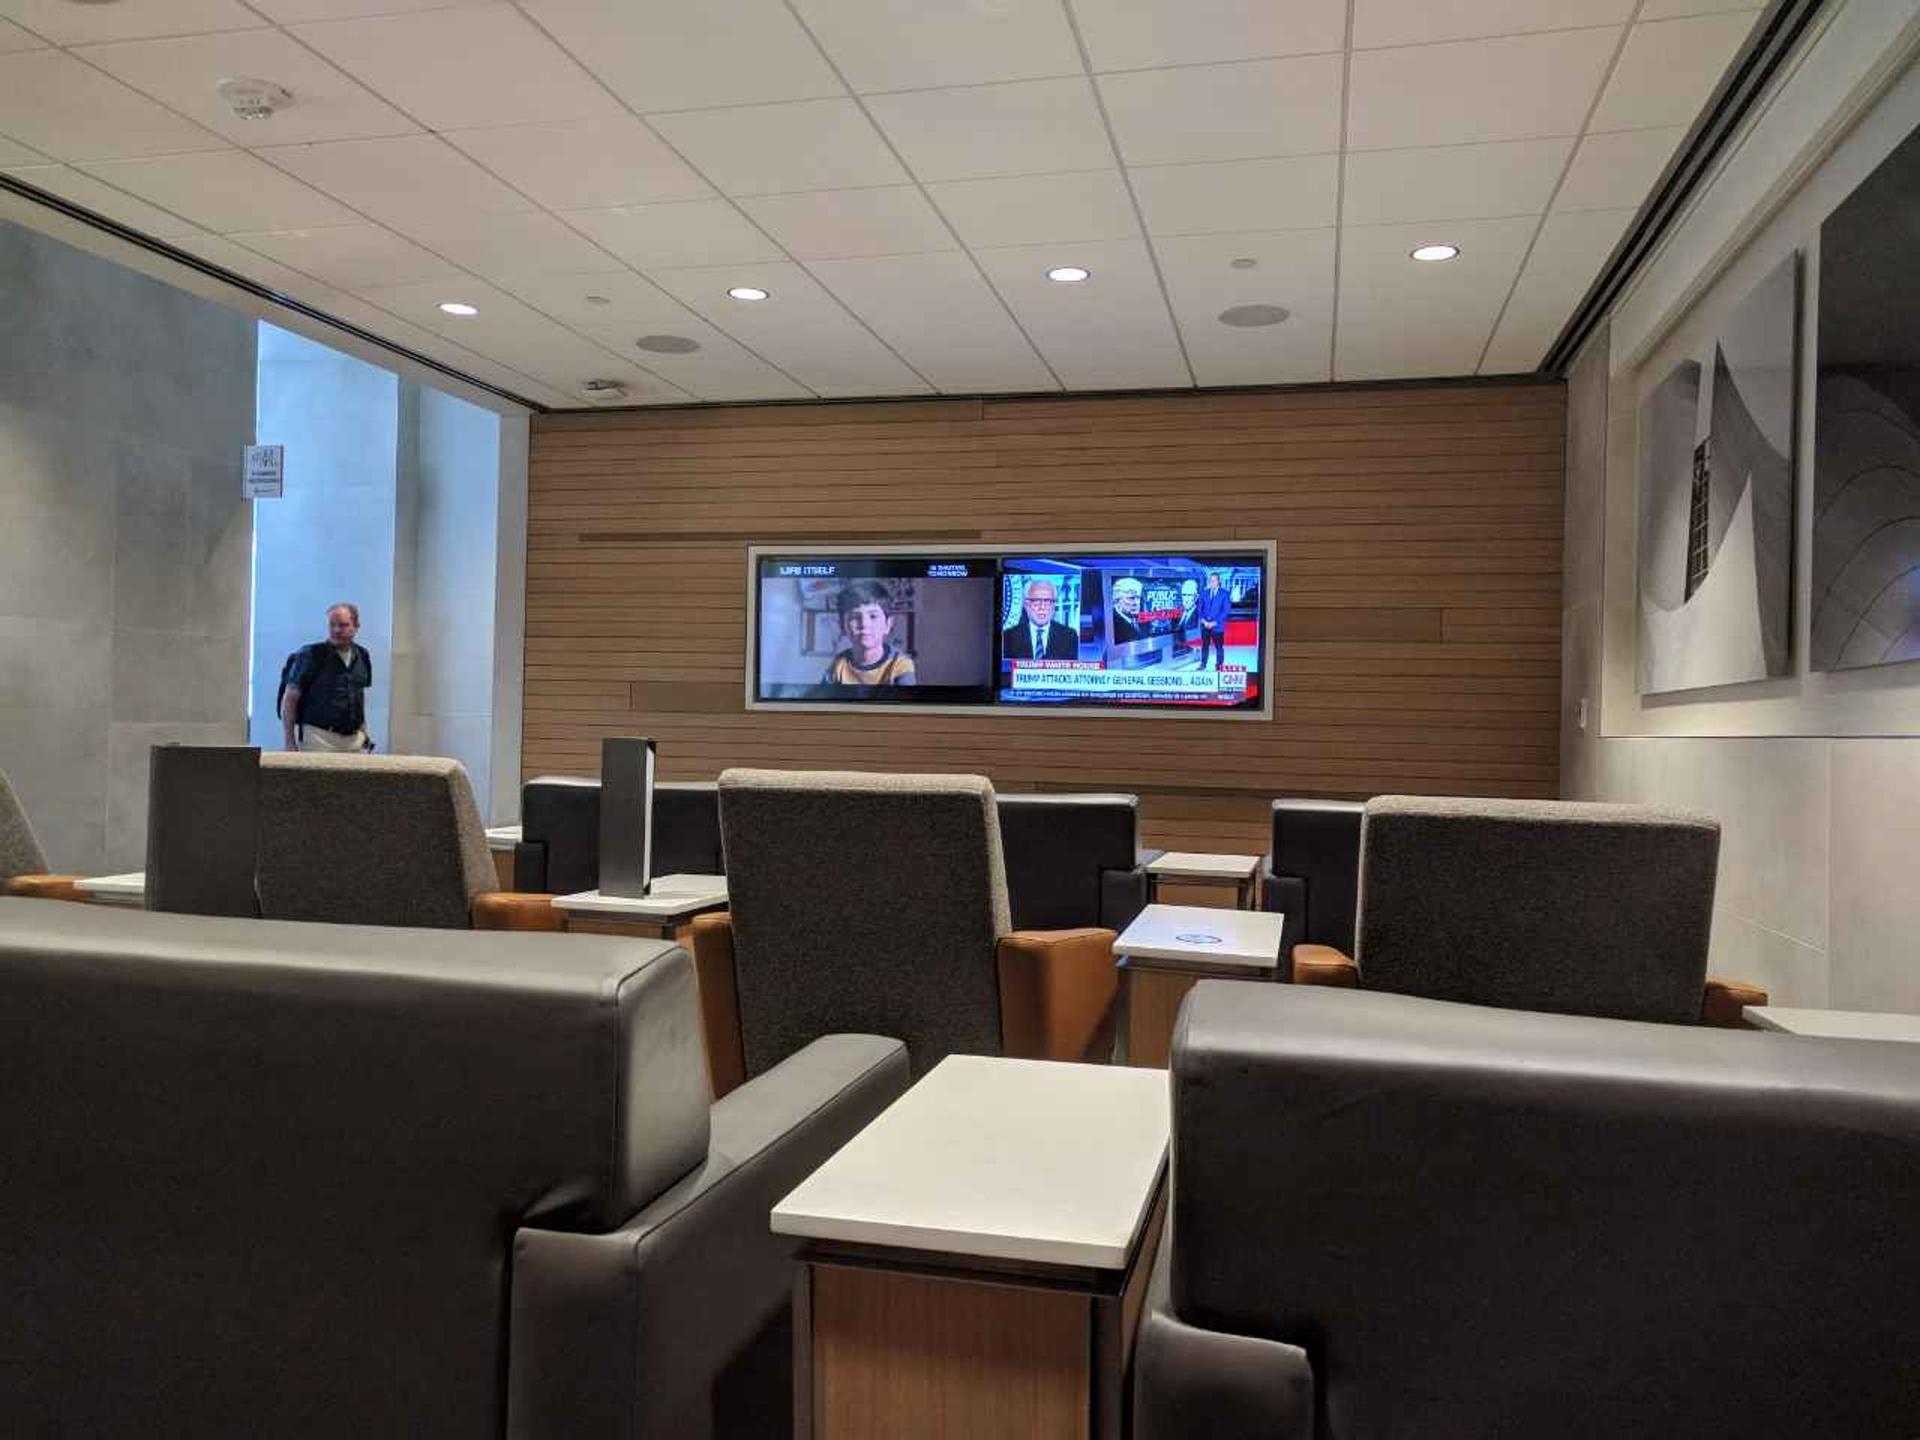 American Airlines Admirals Club image 14 of 17